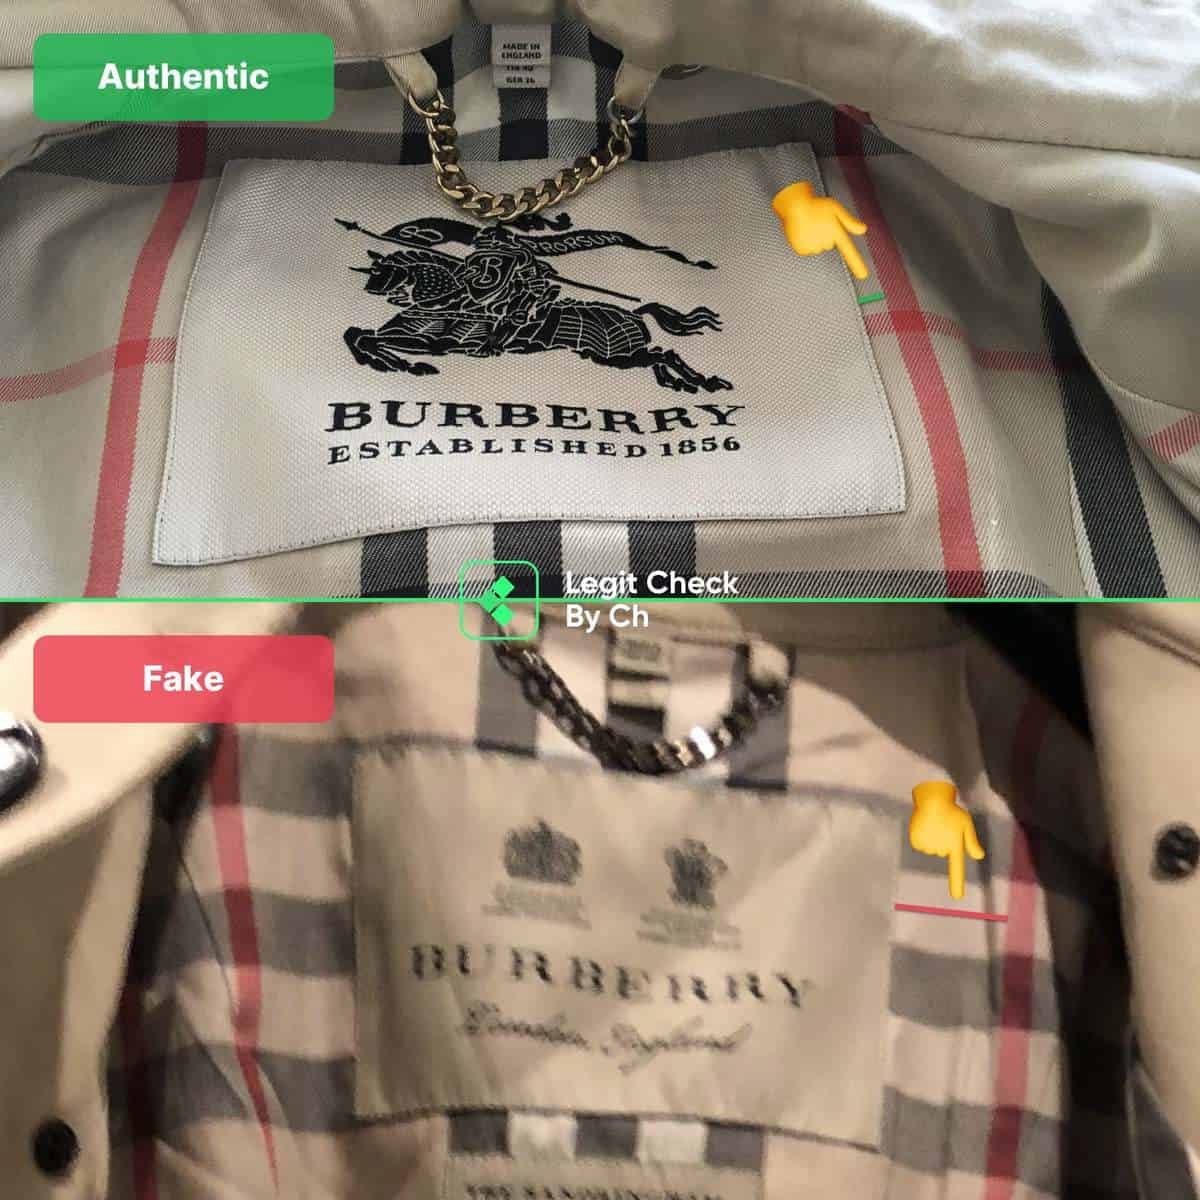 mint snowman Humility How To Spot Fake Burberry Coats In 2021 - Fake Vs Real Burberry Trench Coat  Guide - Legit Check By Ch